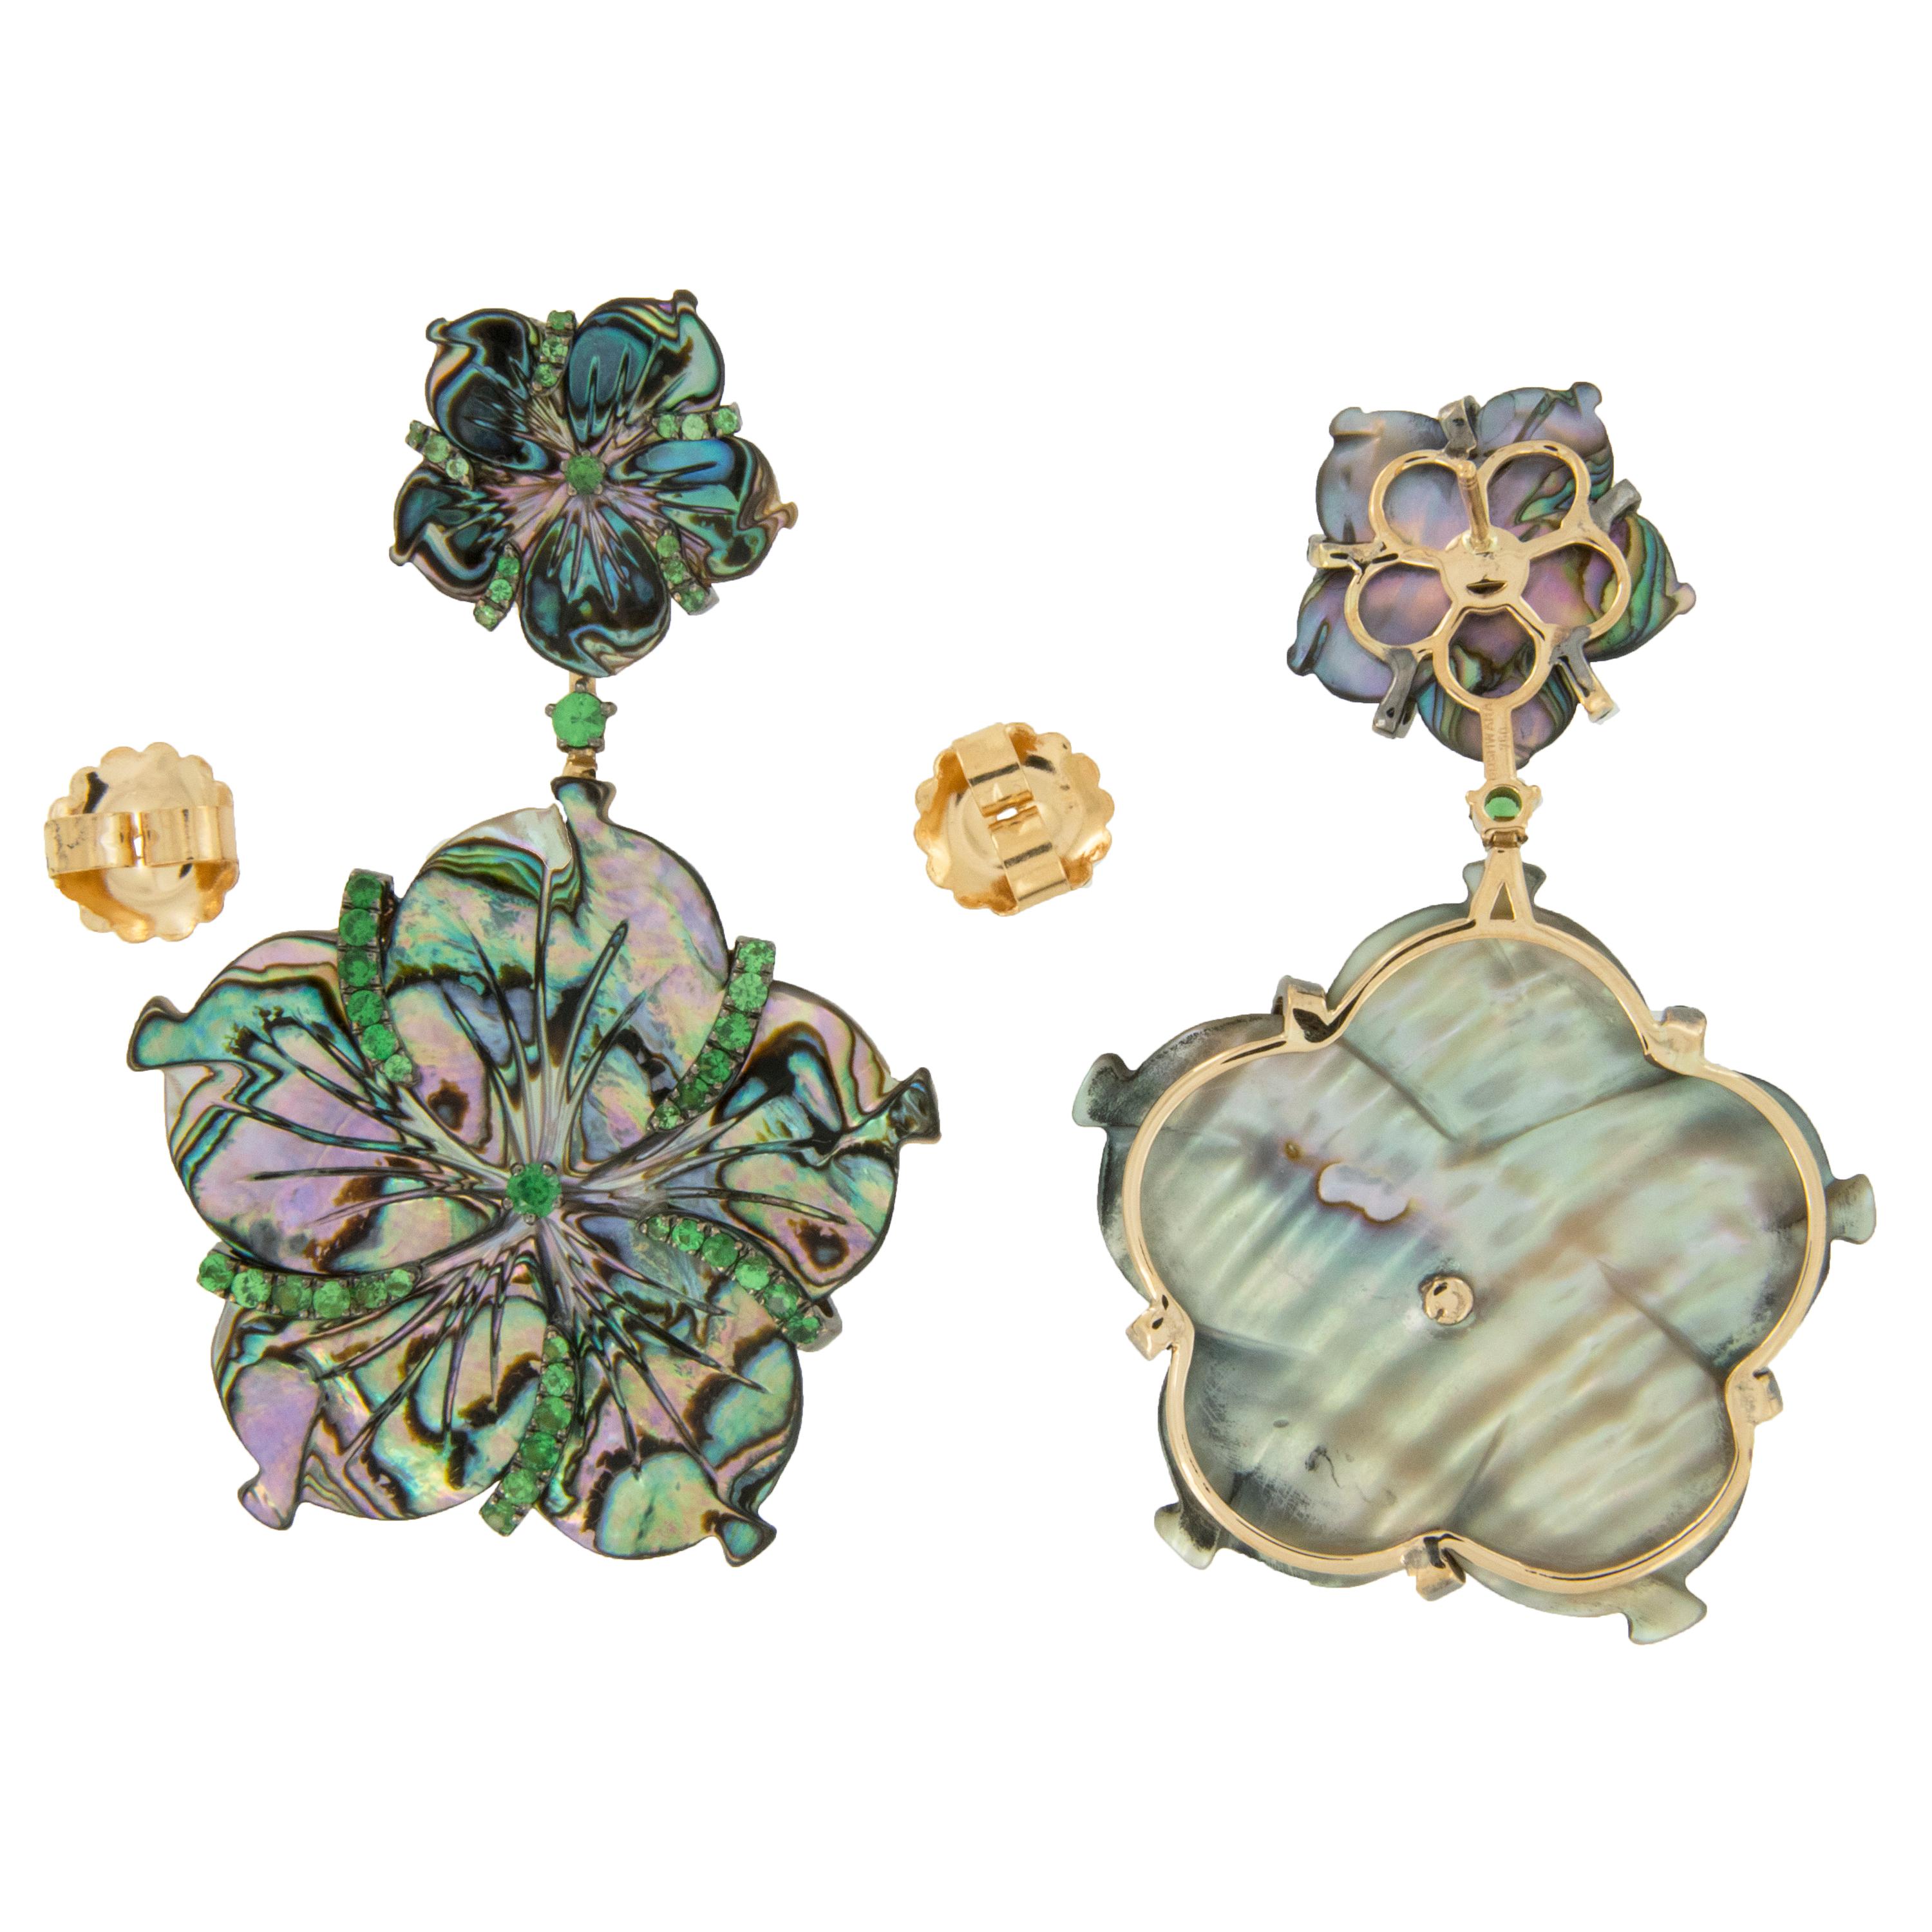 Goshwara, a term for perfect shape, is a company known for exceptional color gems and these 18 karat yellow gold carved floral earrings with carved grey mother of pearl = 31,55 Cttw & 0.78 Cttw Tsavorites is no exception! The Innate Collection uses